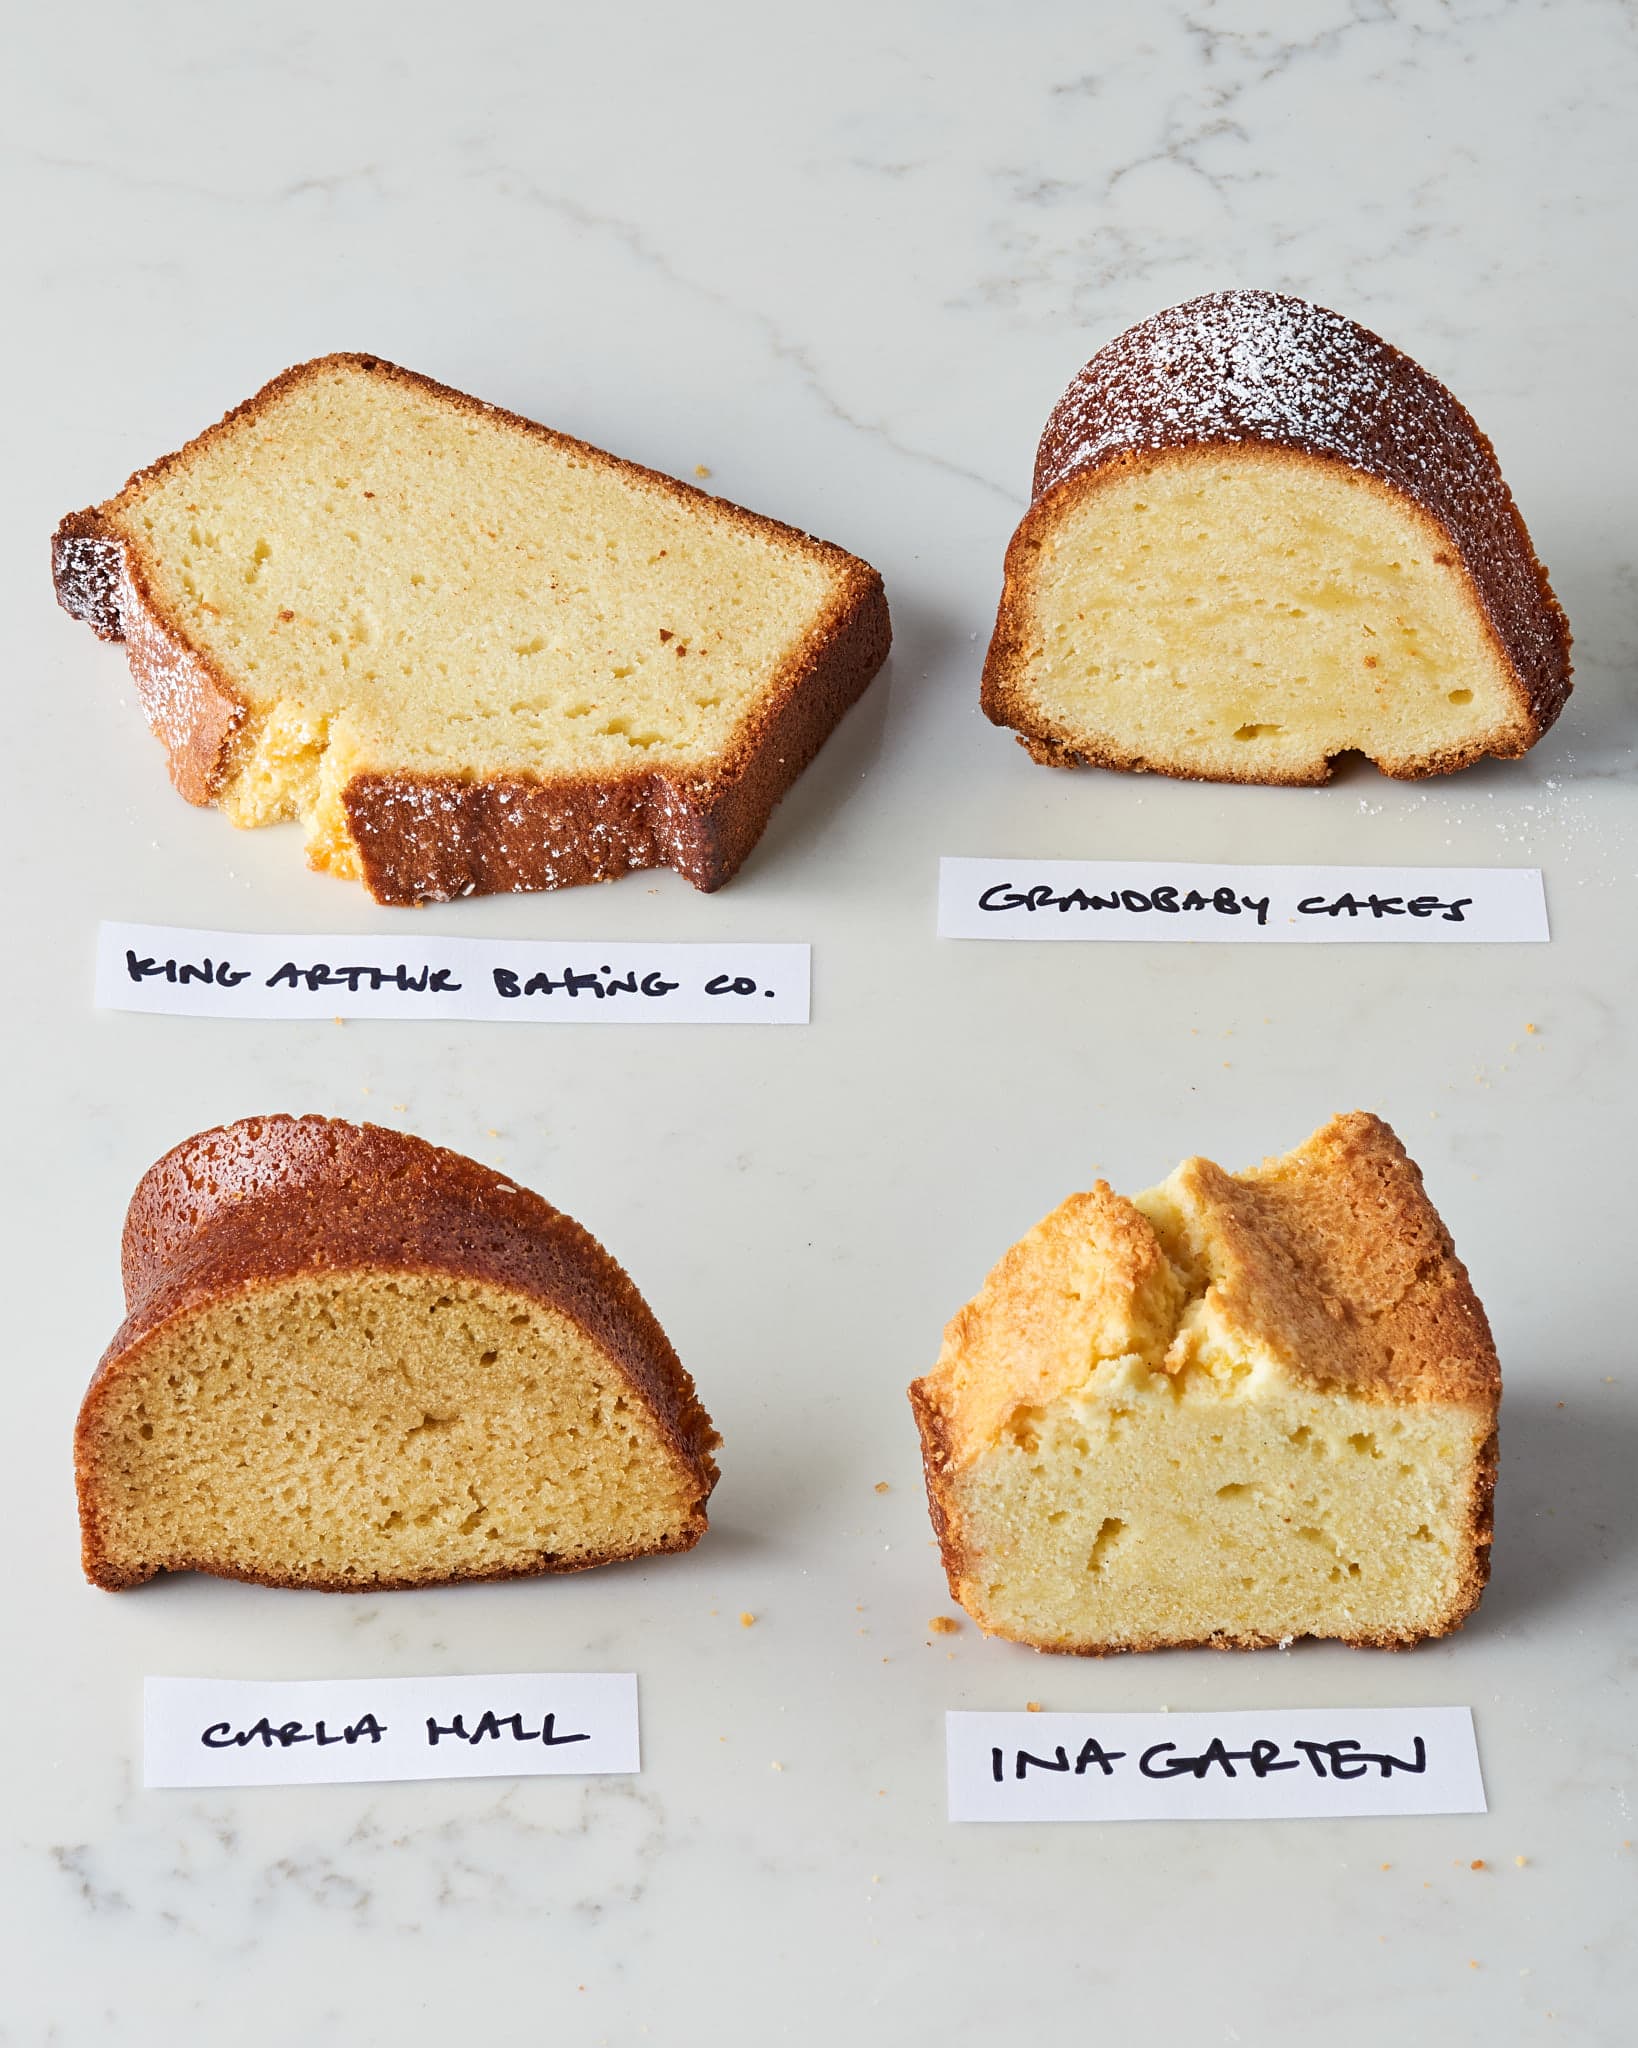 Classic Pound Cake Recipe - Only 4 Ingredients!